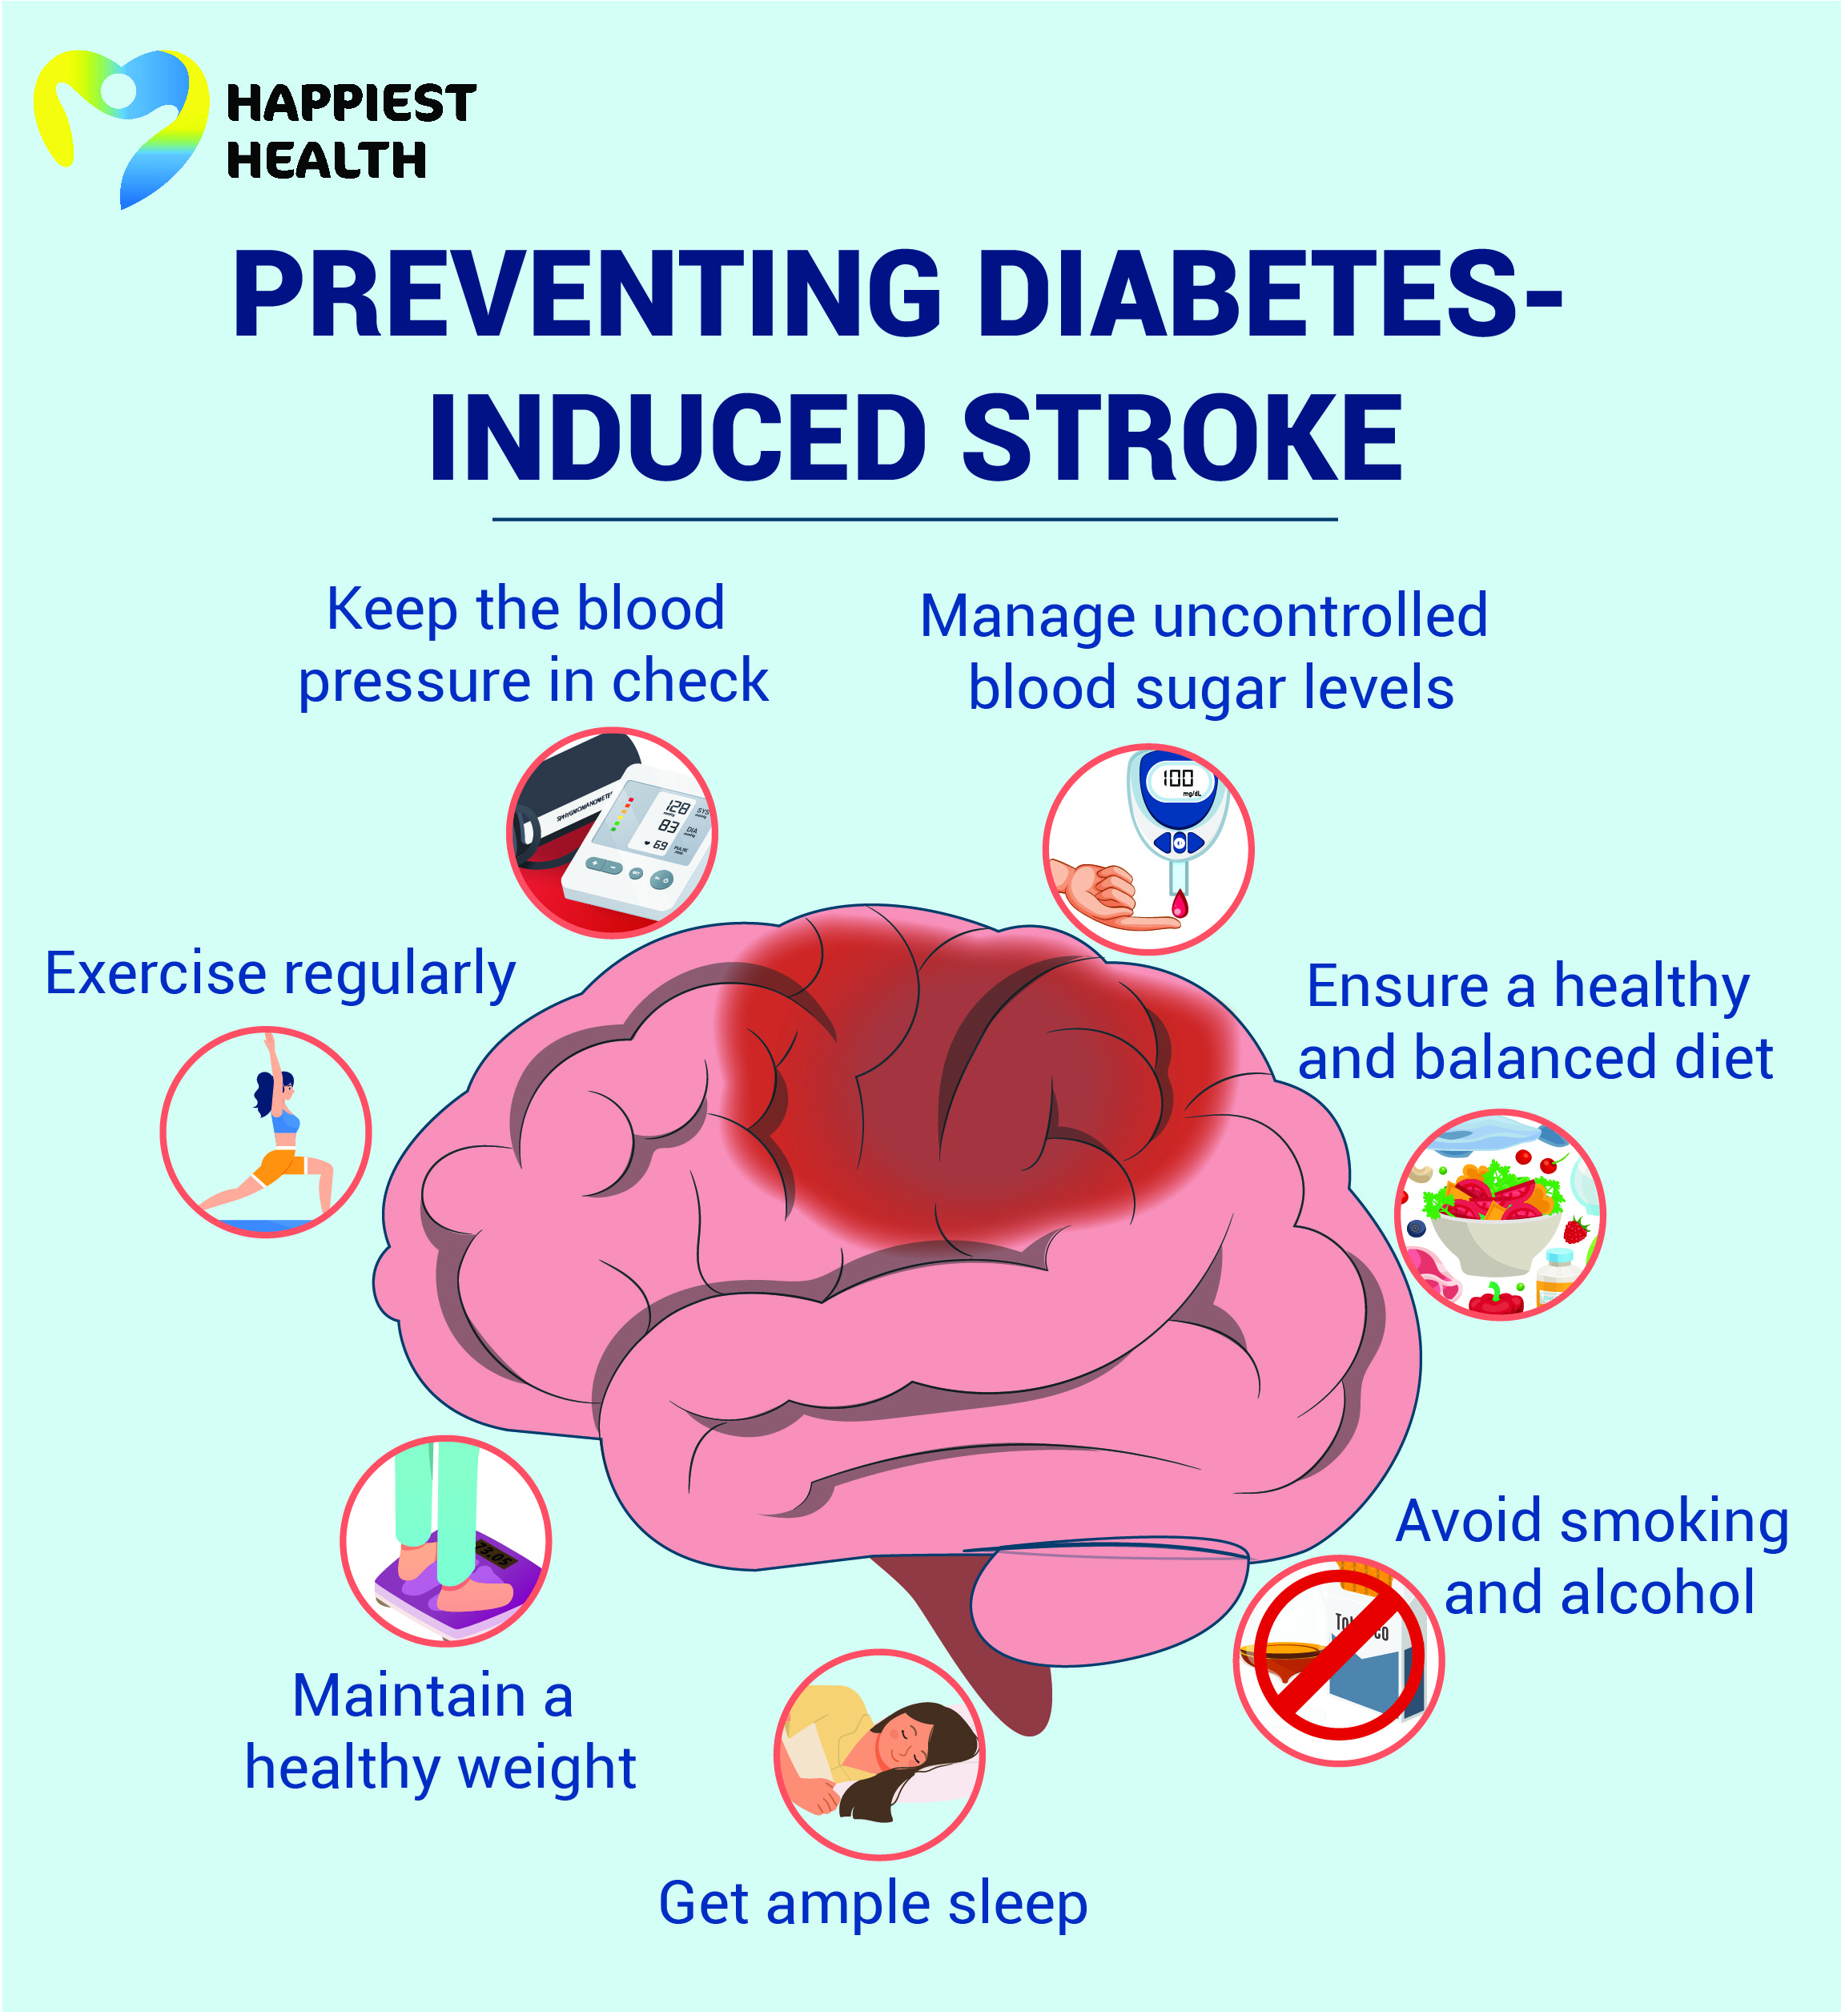 Preventing diabetes-induced stroke